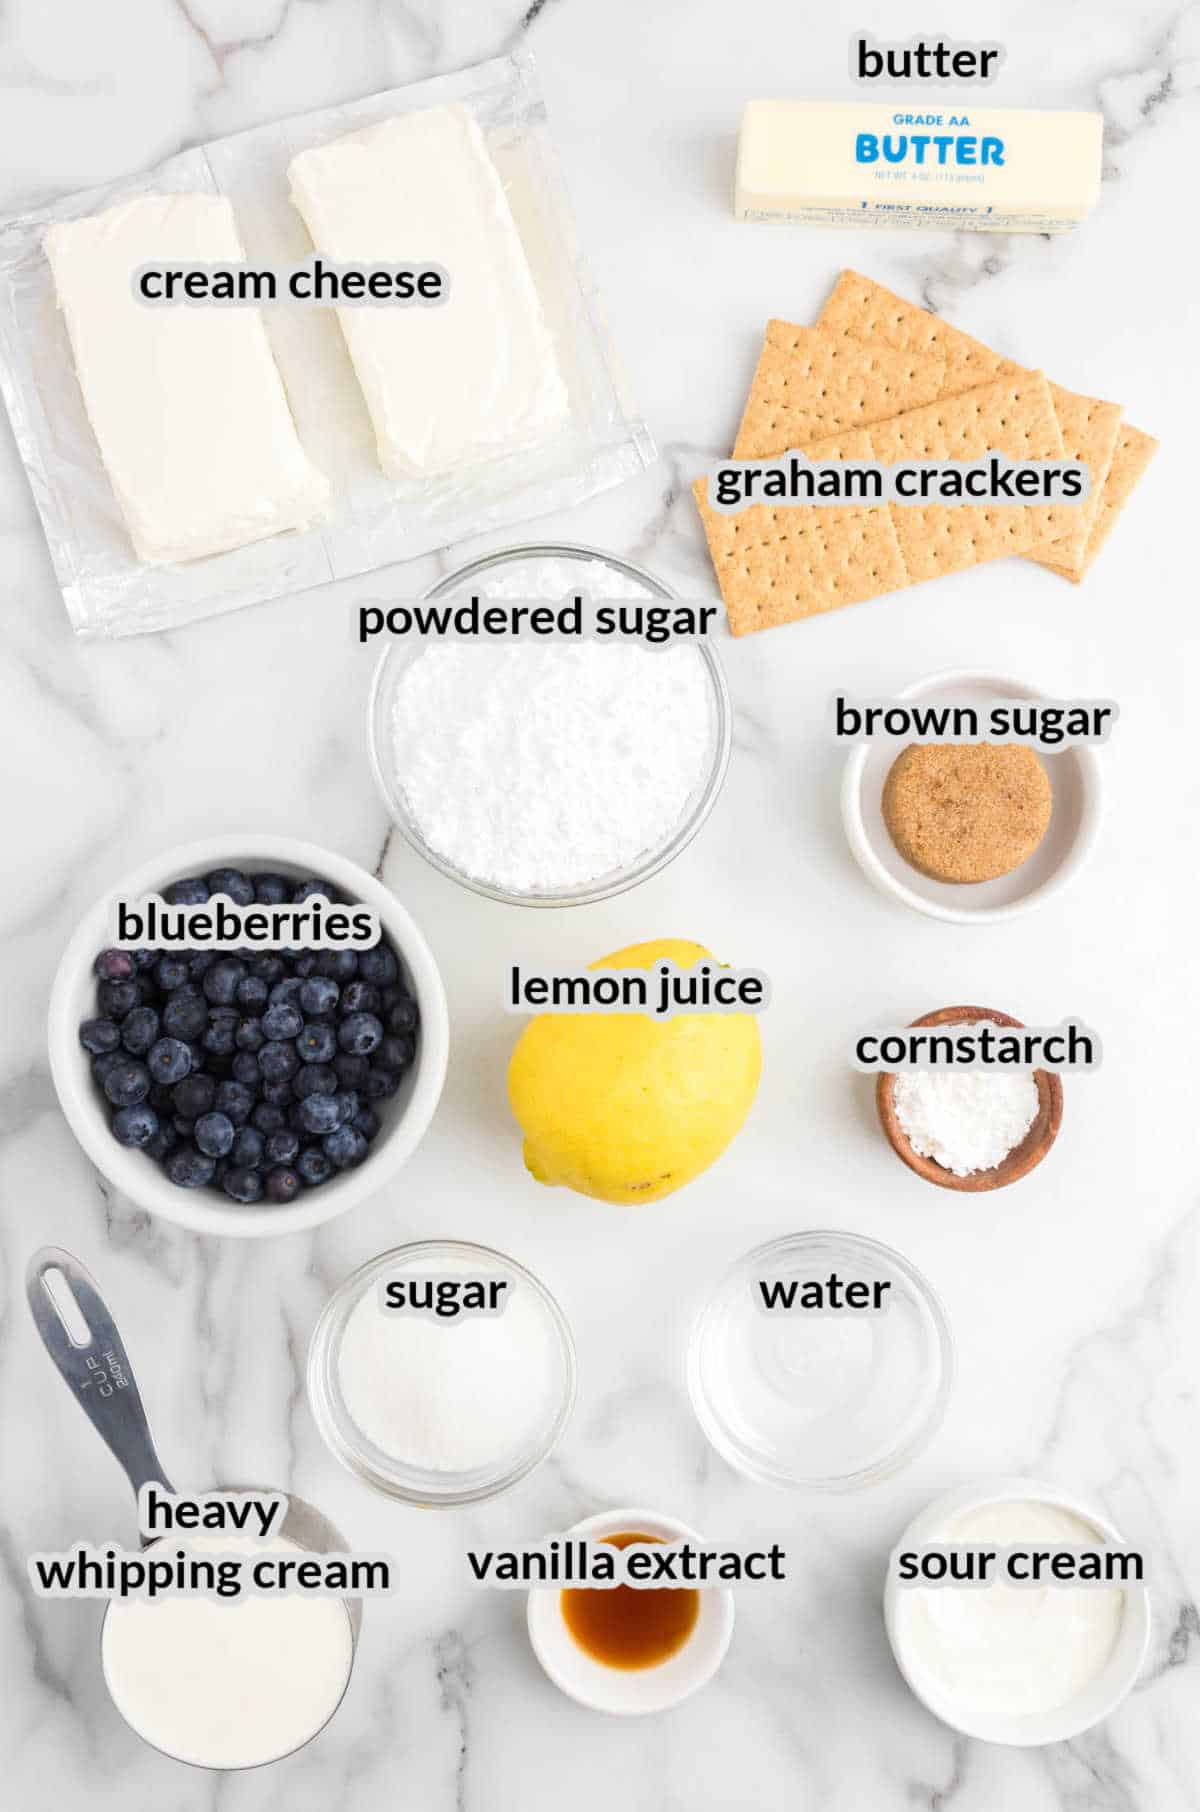 Overhead Image of No Bake Blueberry Cheesecake Ingredients